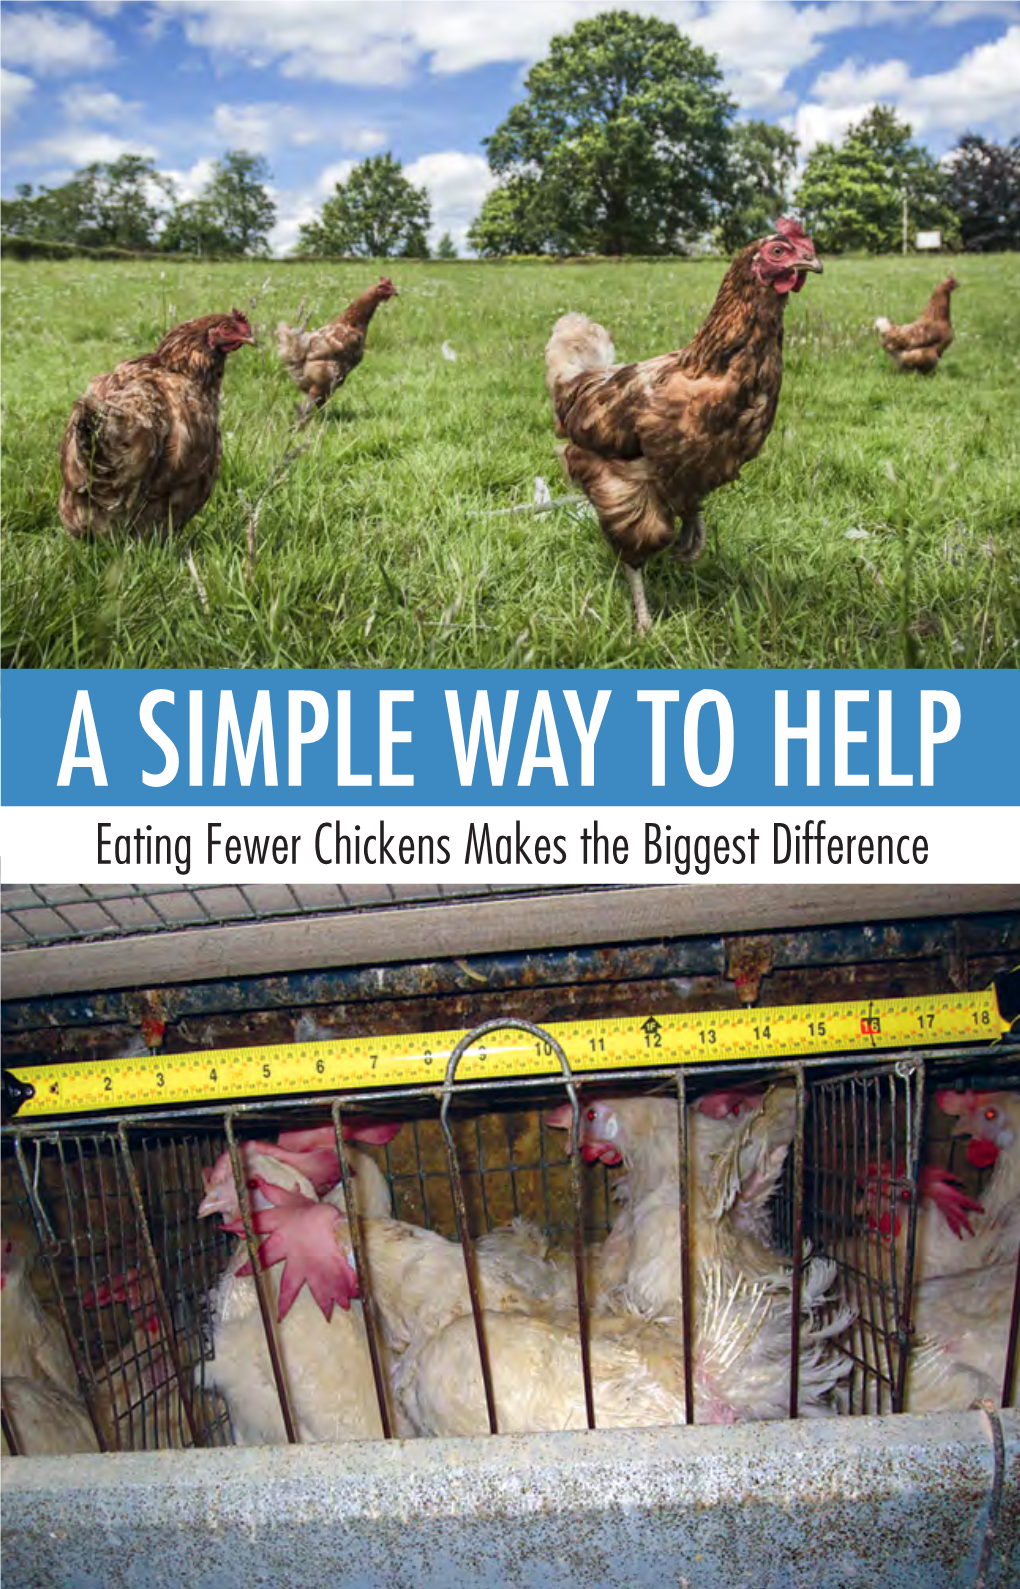 A Simple Way to Help Eating Fewer Chickens Makes the Biggest Difference Eat Less Chicken to Help the Most Animals!